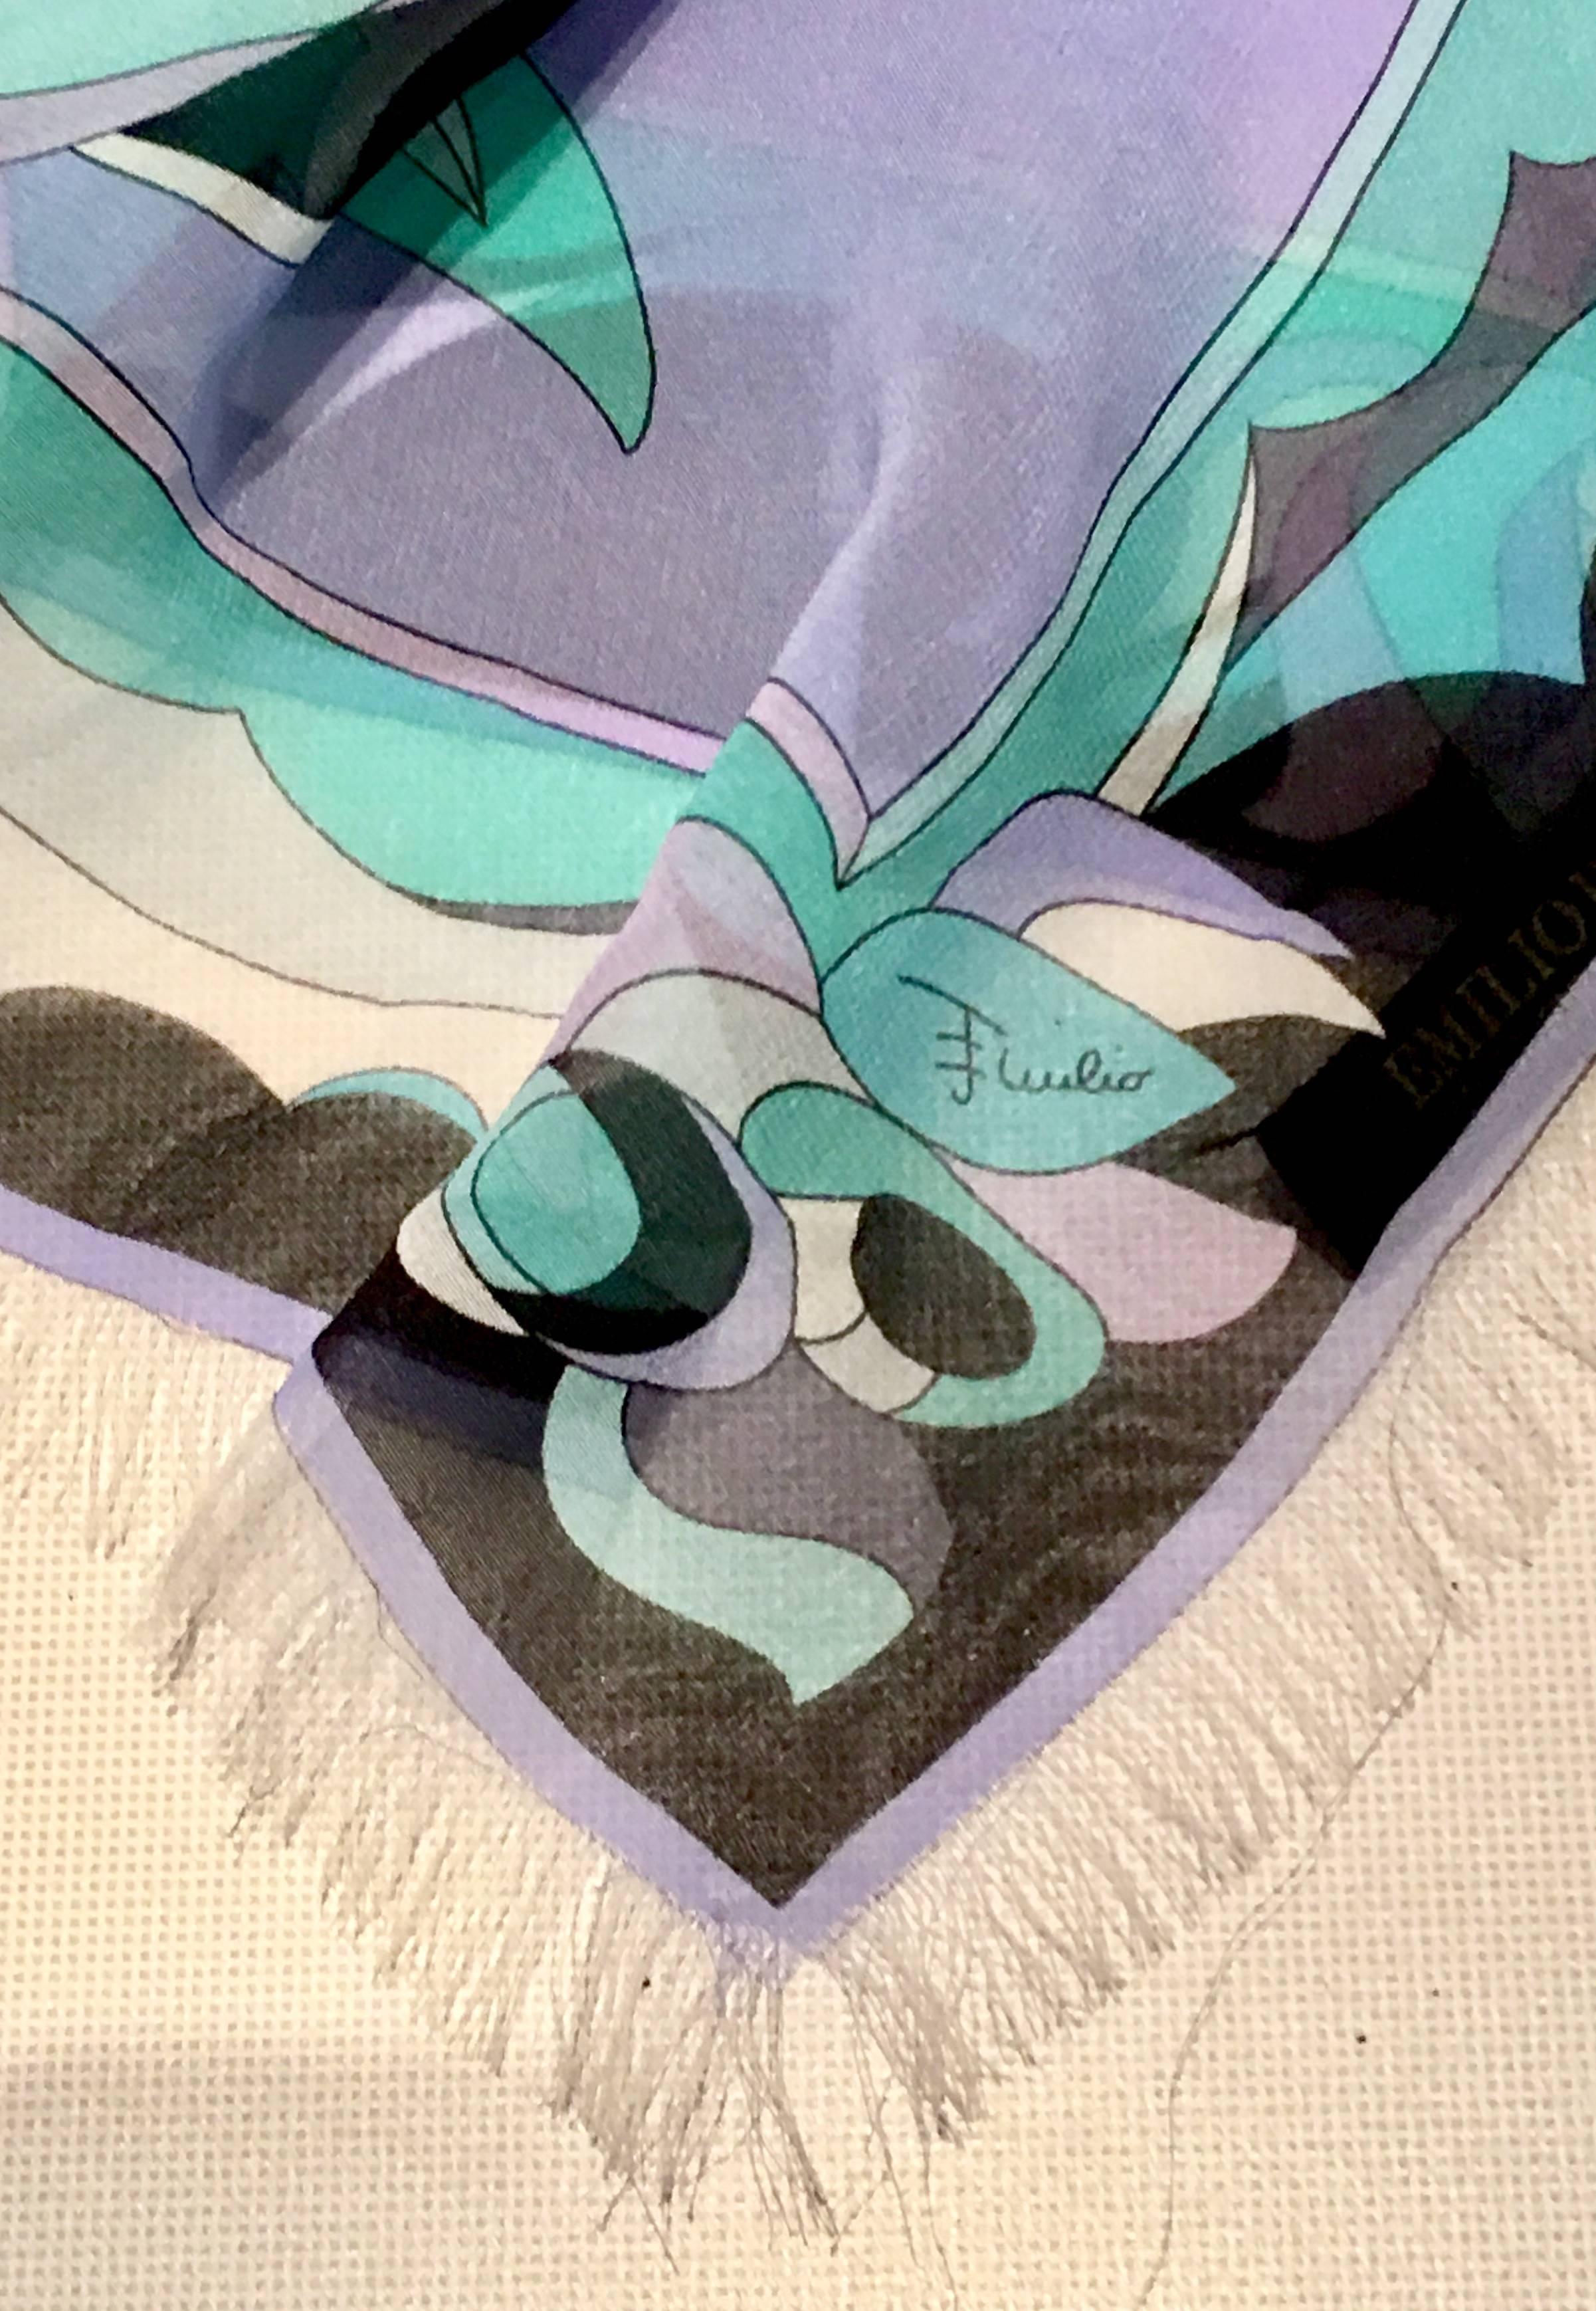 Emilio Pucci Geometric Print Silk Chiffon Oversized Scarf In Excellent Condition For Sale In West Palm Beach, FL